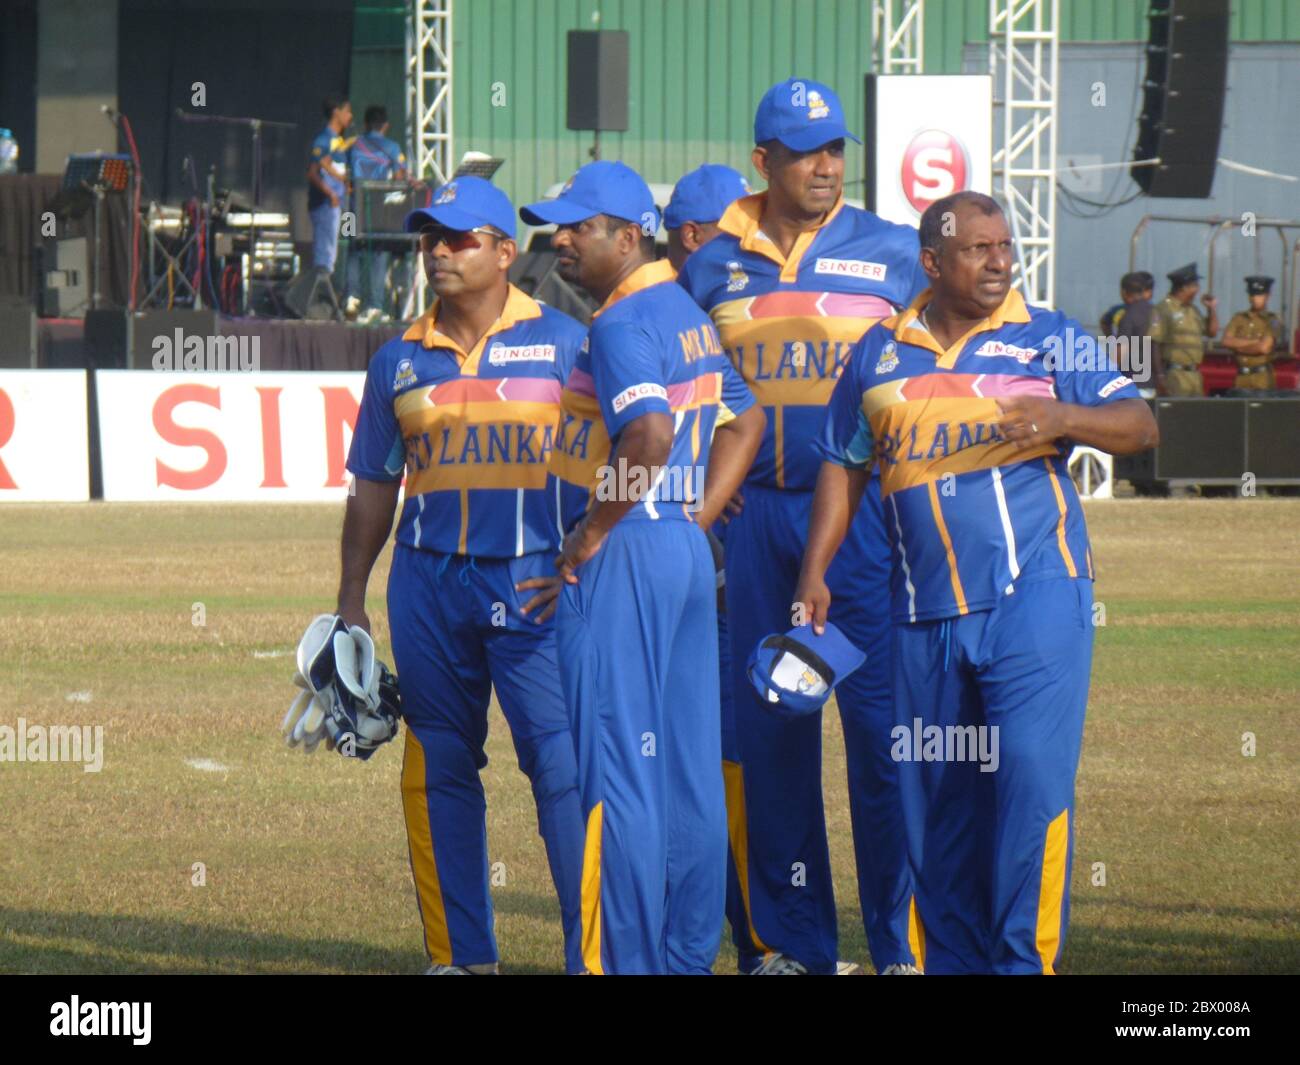 Former Sri Lanka cricket World cup winners from 1996. In a friendly match to raise funds for less fortunate cricketers. From left, Romesh Kaluwitharana, Muttiah Muralitharan, Promodya Wickramasignhe  and Aravinda De Silva. Stock Photo